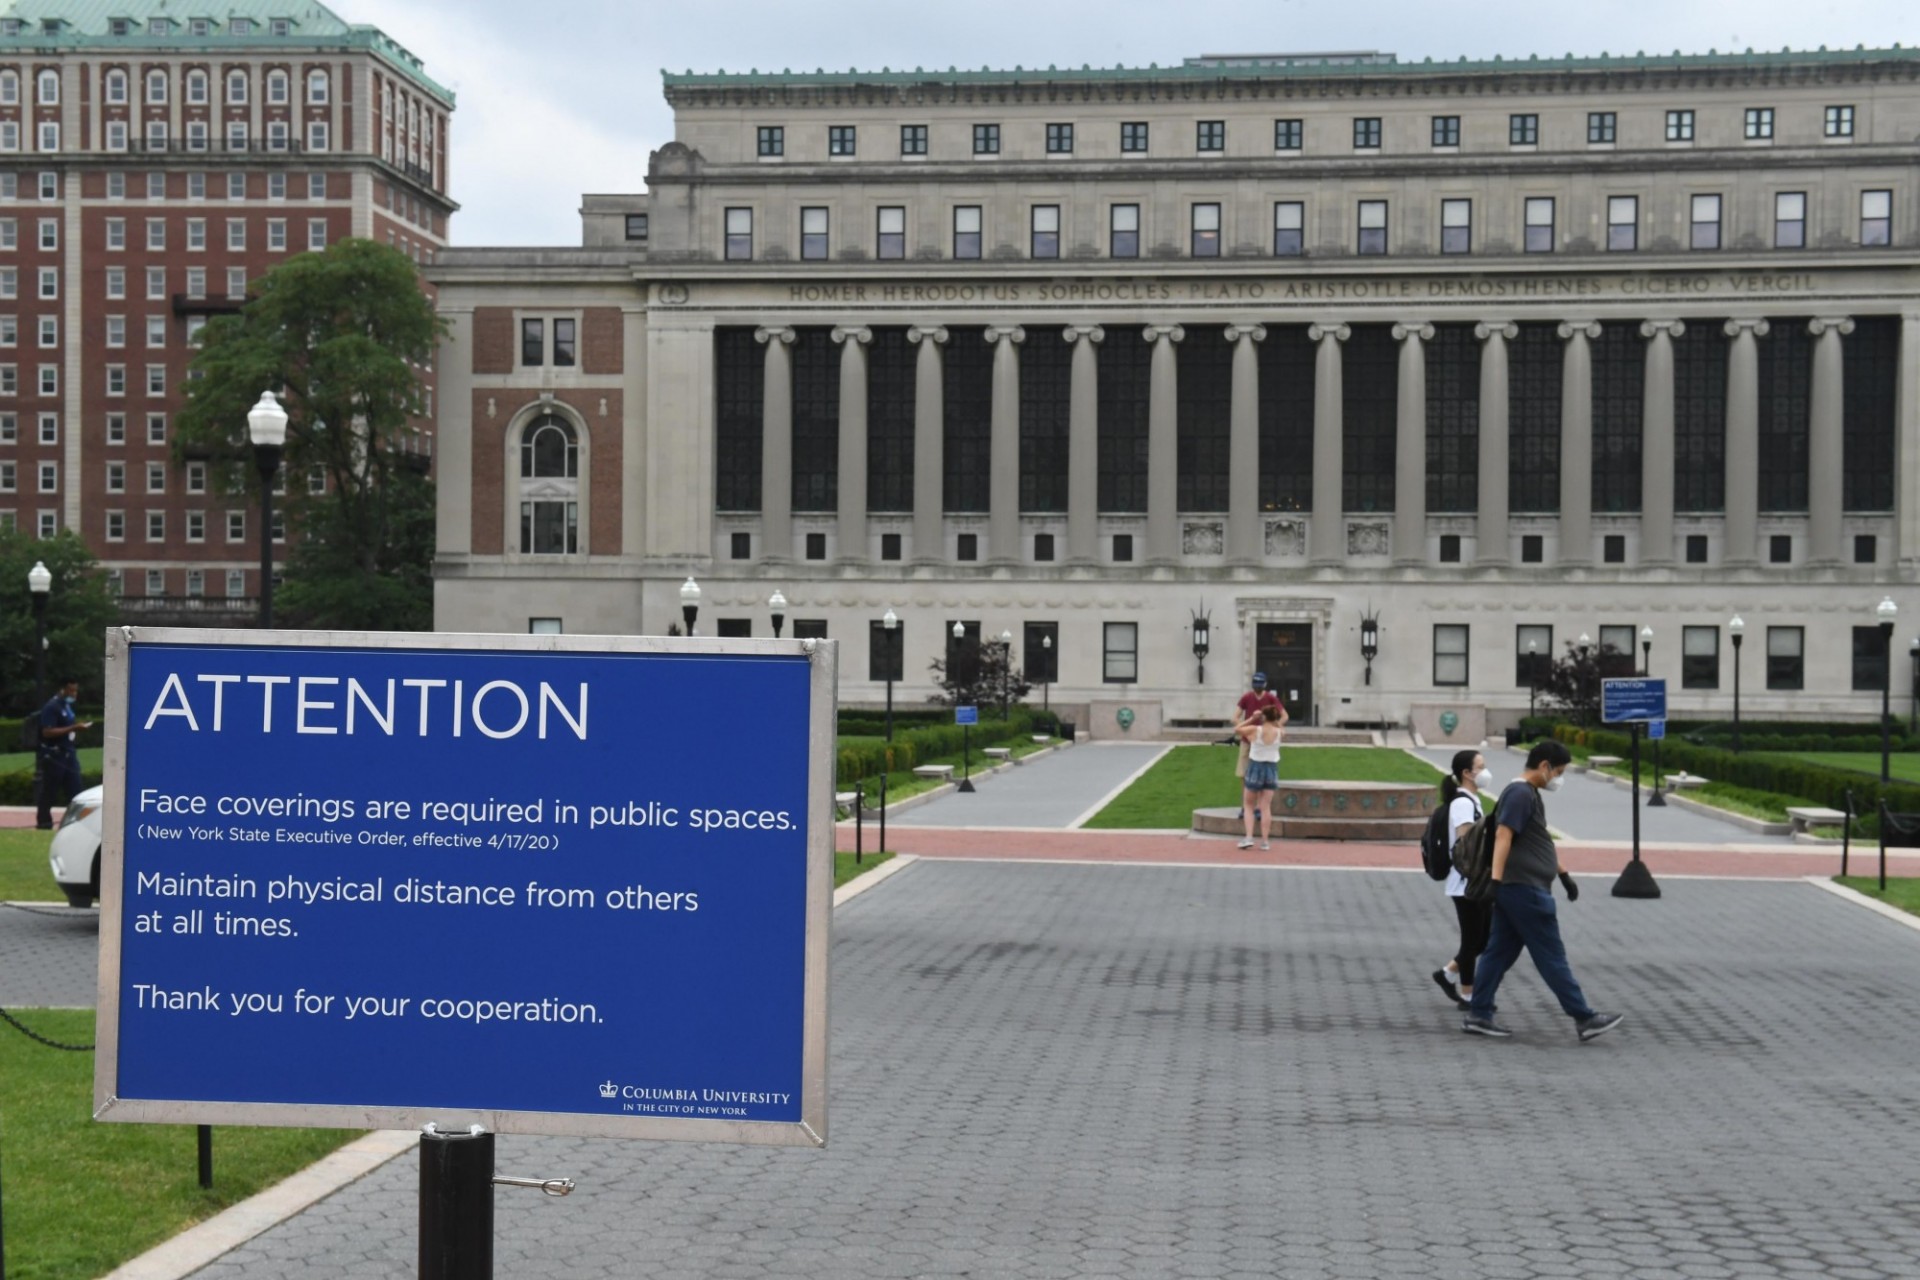 A sign in front of Columbia University's Butler library warns that face coverings are required in public spaces and that social distancing must be maintained. 